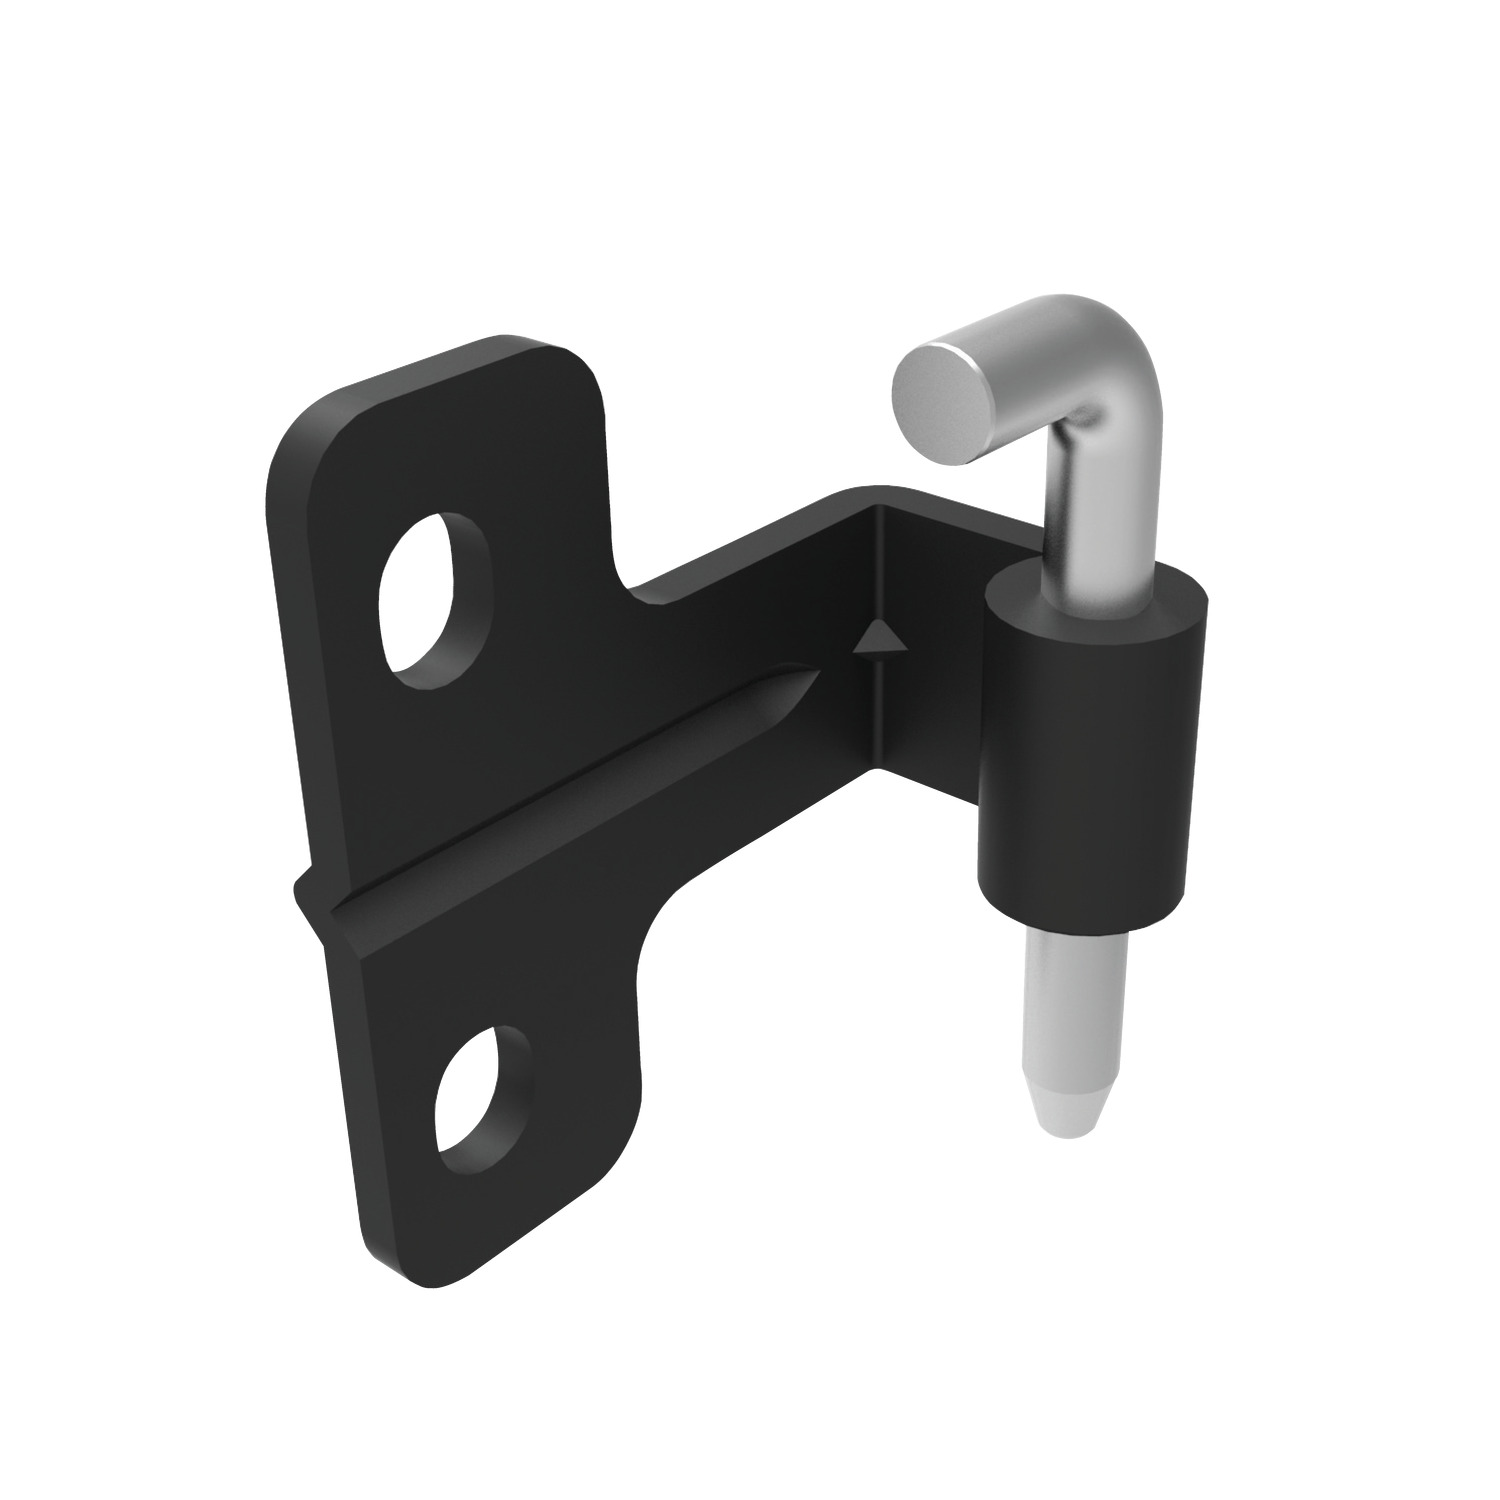 S2176 - Concealed Pivot Hinges - Lift Off